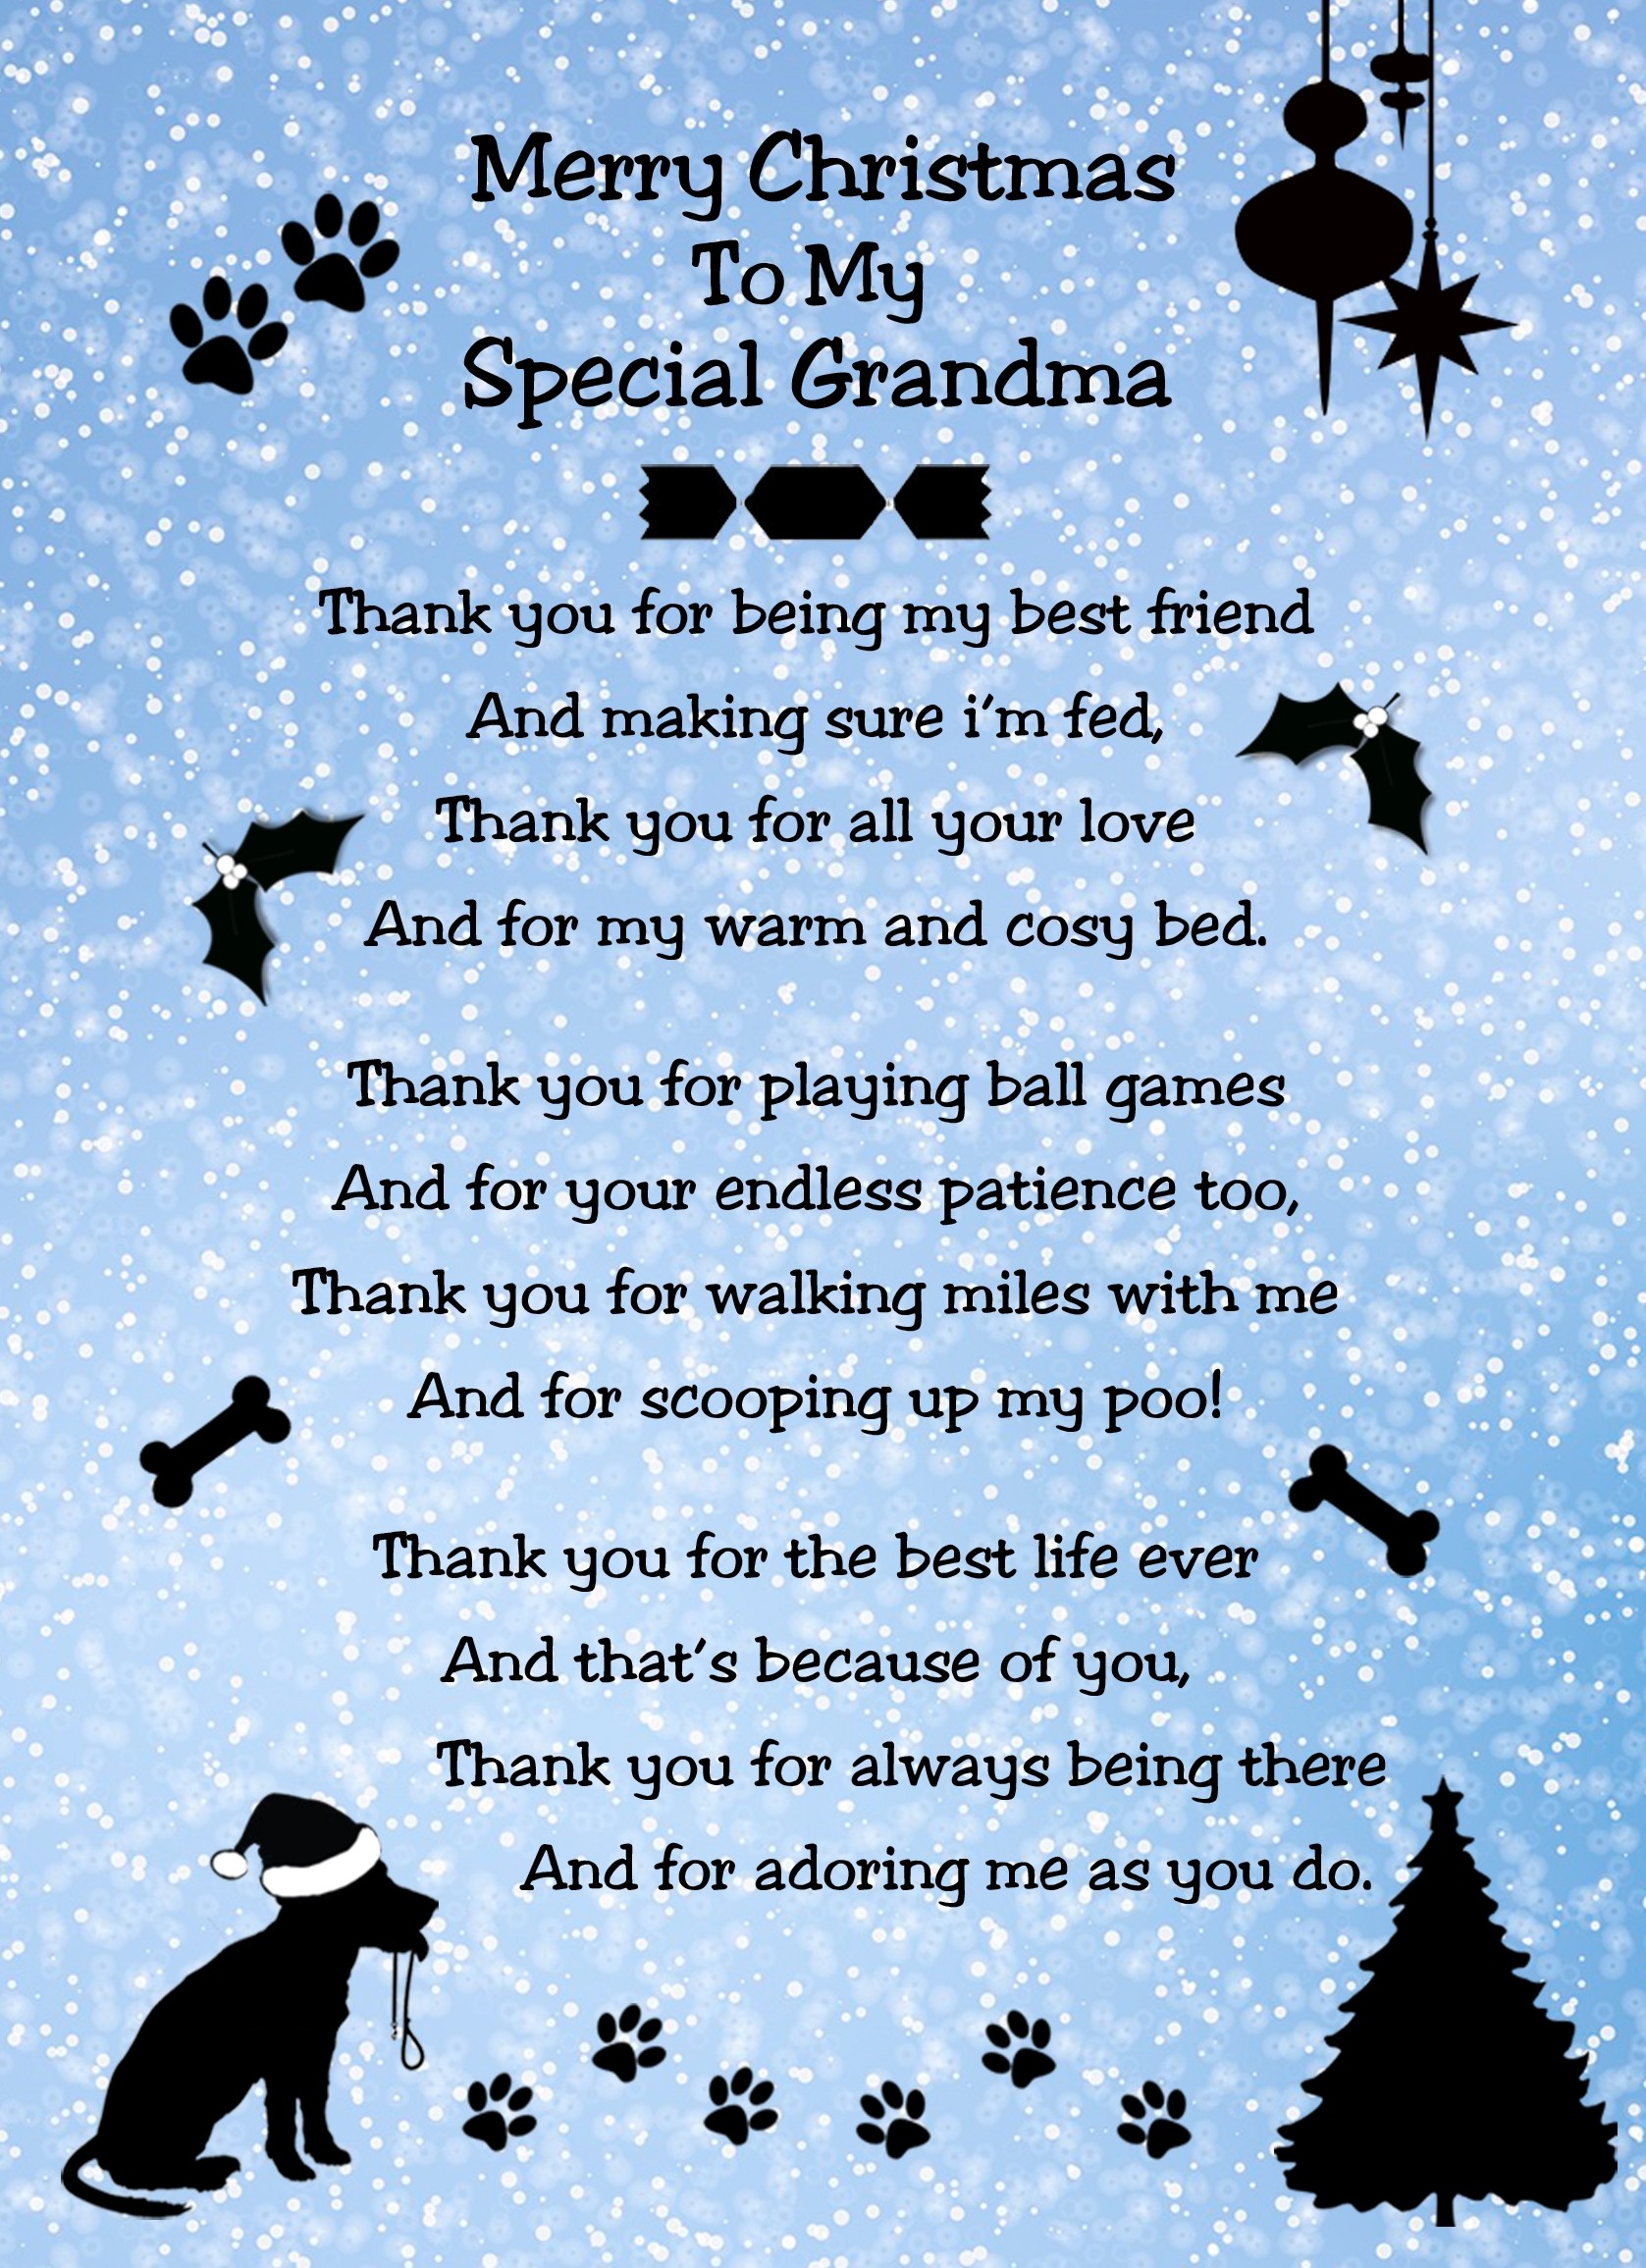 From The Dog Verse Poem Christmas Card (Special Grandma, Snow, Merry Christmas)